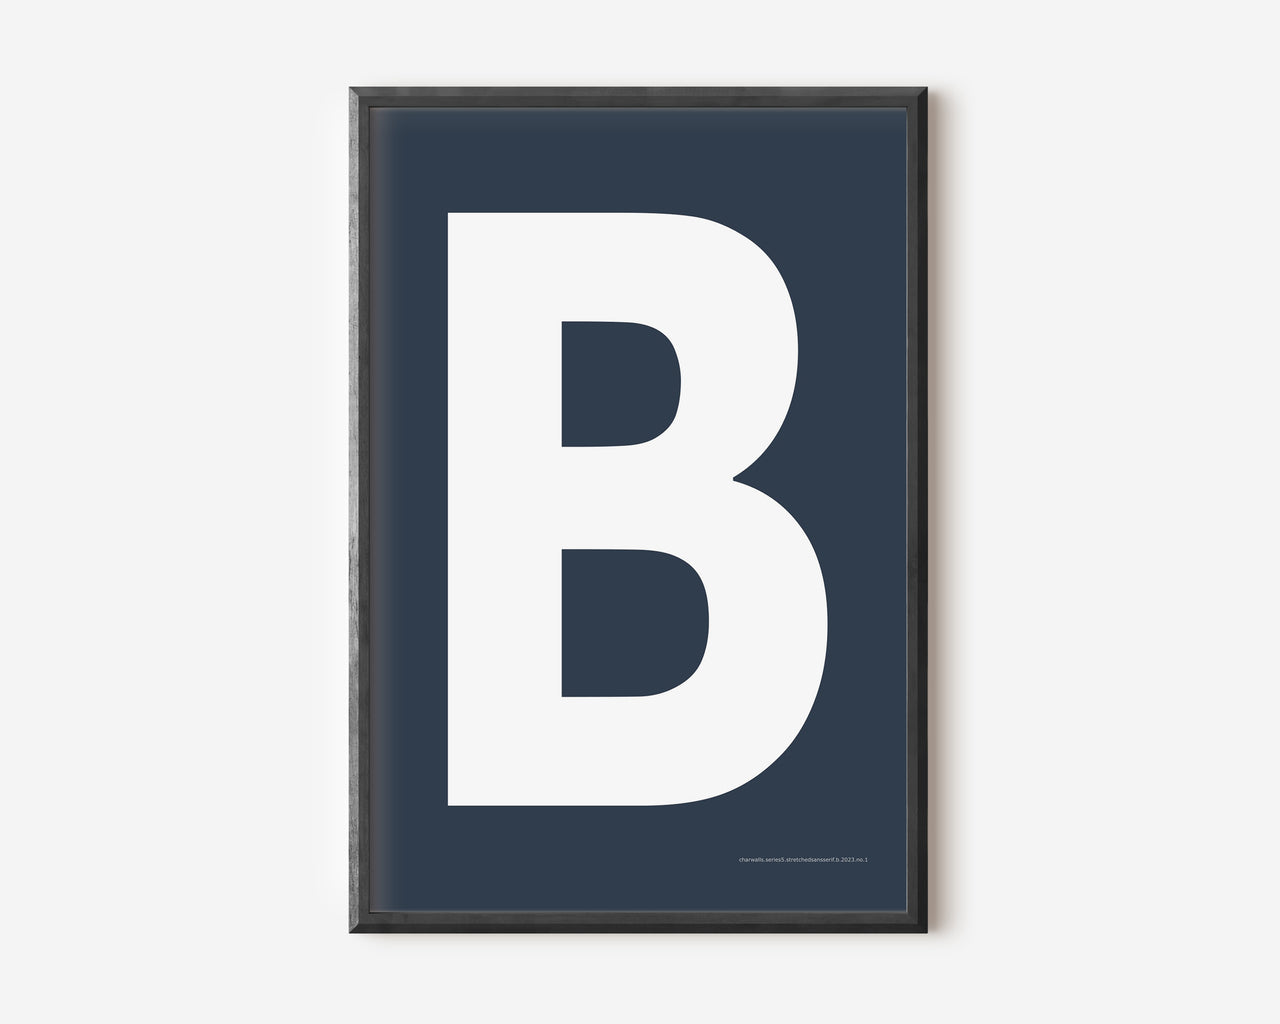 Modern art print with an uppercase white letter B on a navy blue background.